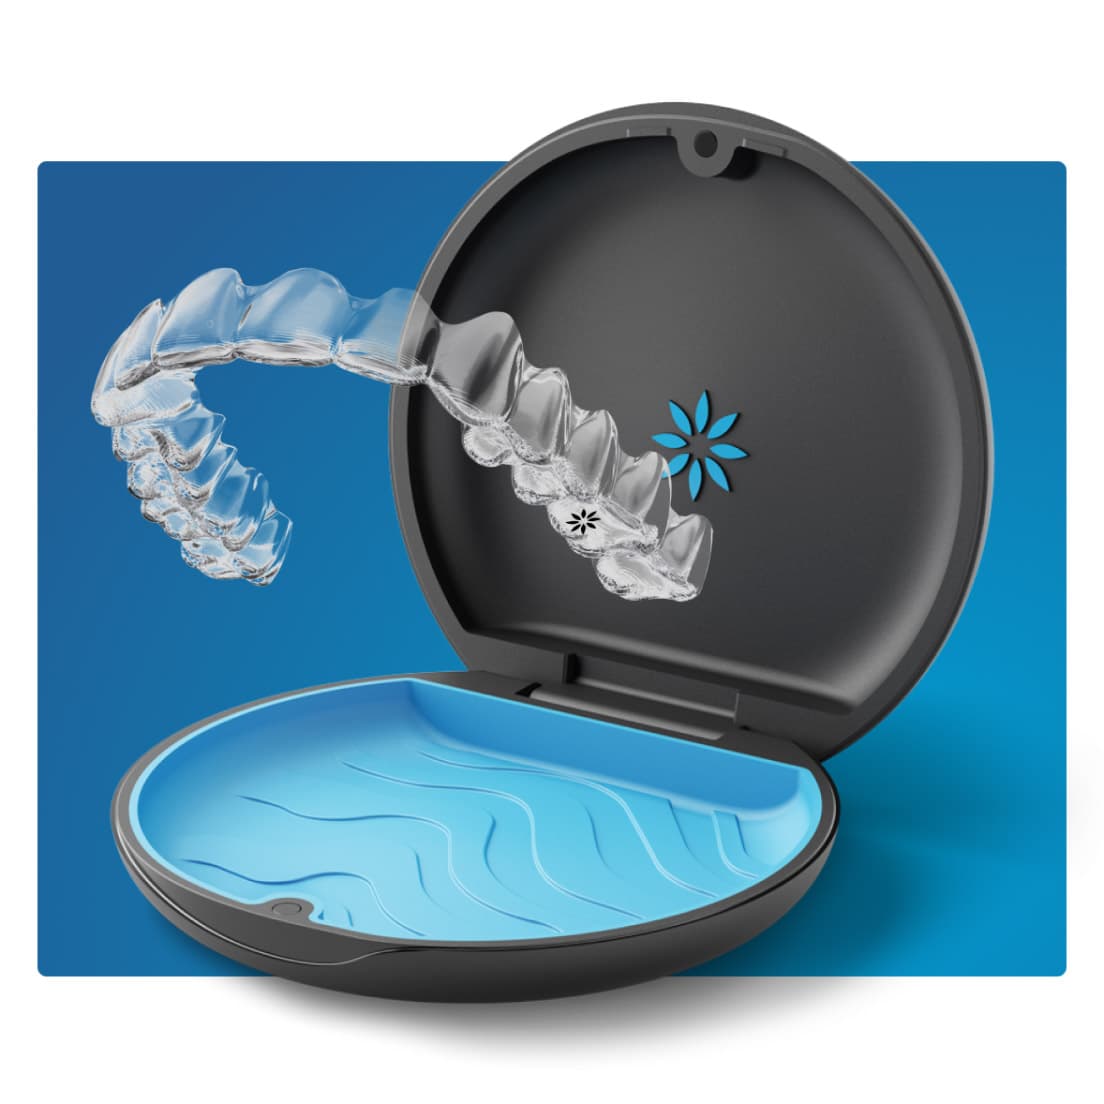 Invisalign Clear Aligners: What is Invisalign and how does it work?